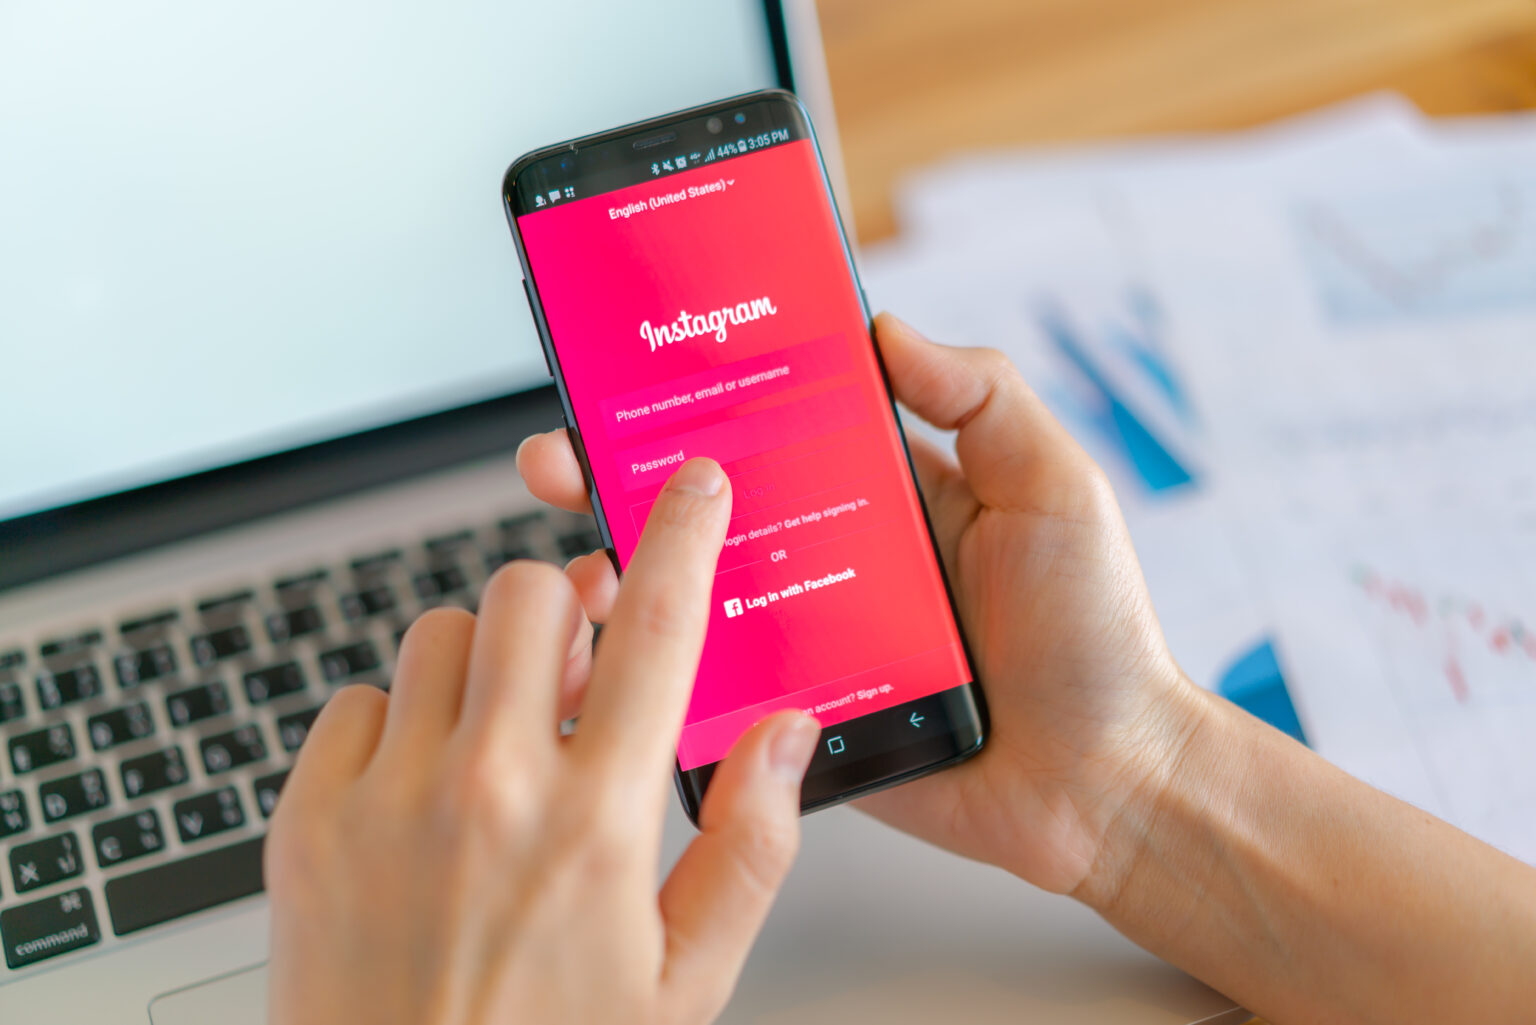 Is there reason to believe that Twitter has a case against Instagram and their killer new app? Take a look at what we found now!